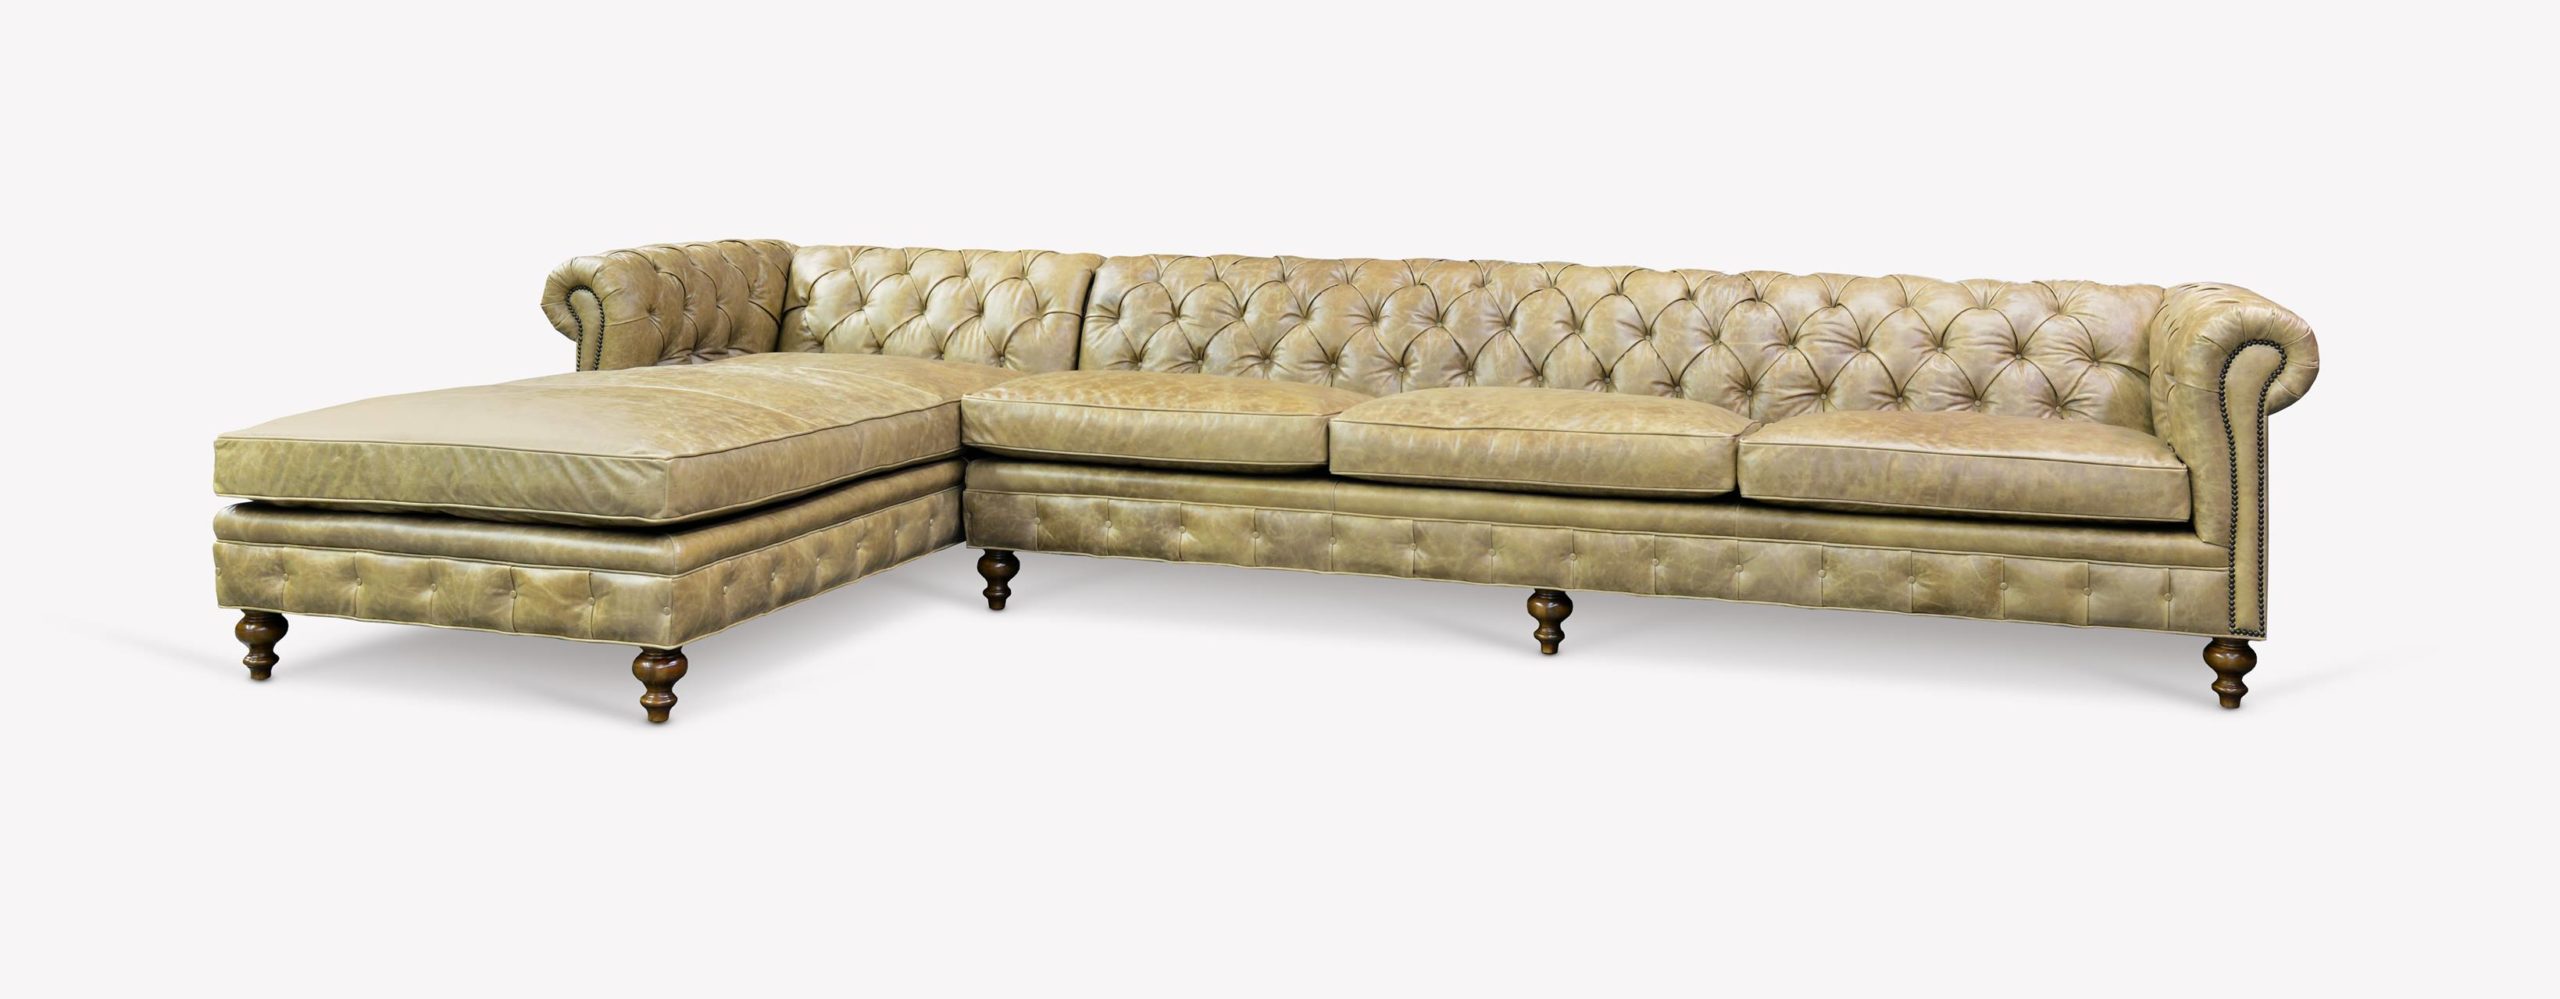 Hemingway Chesterfield Sectional with Chaise